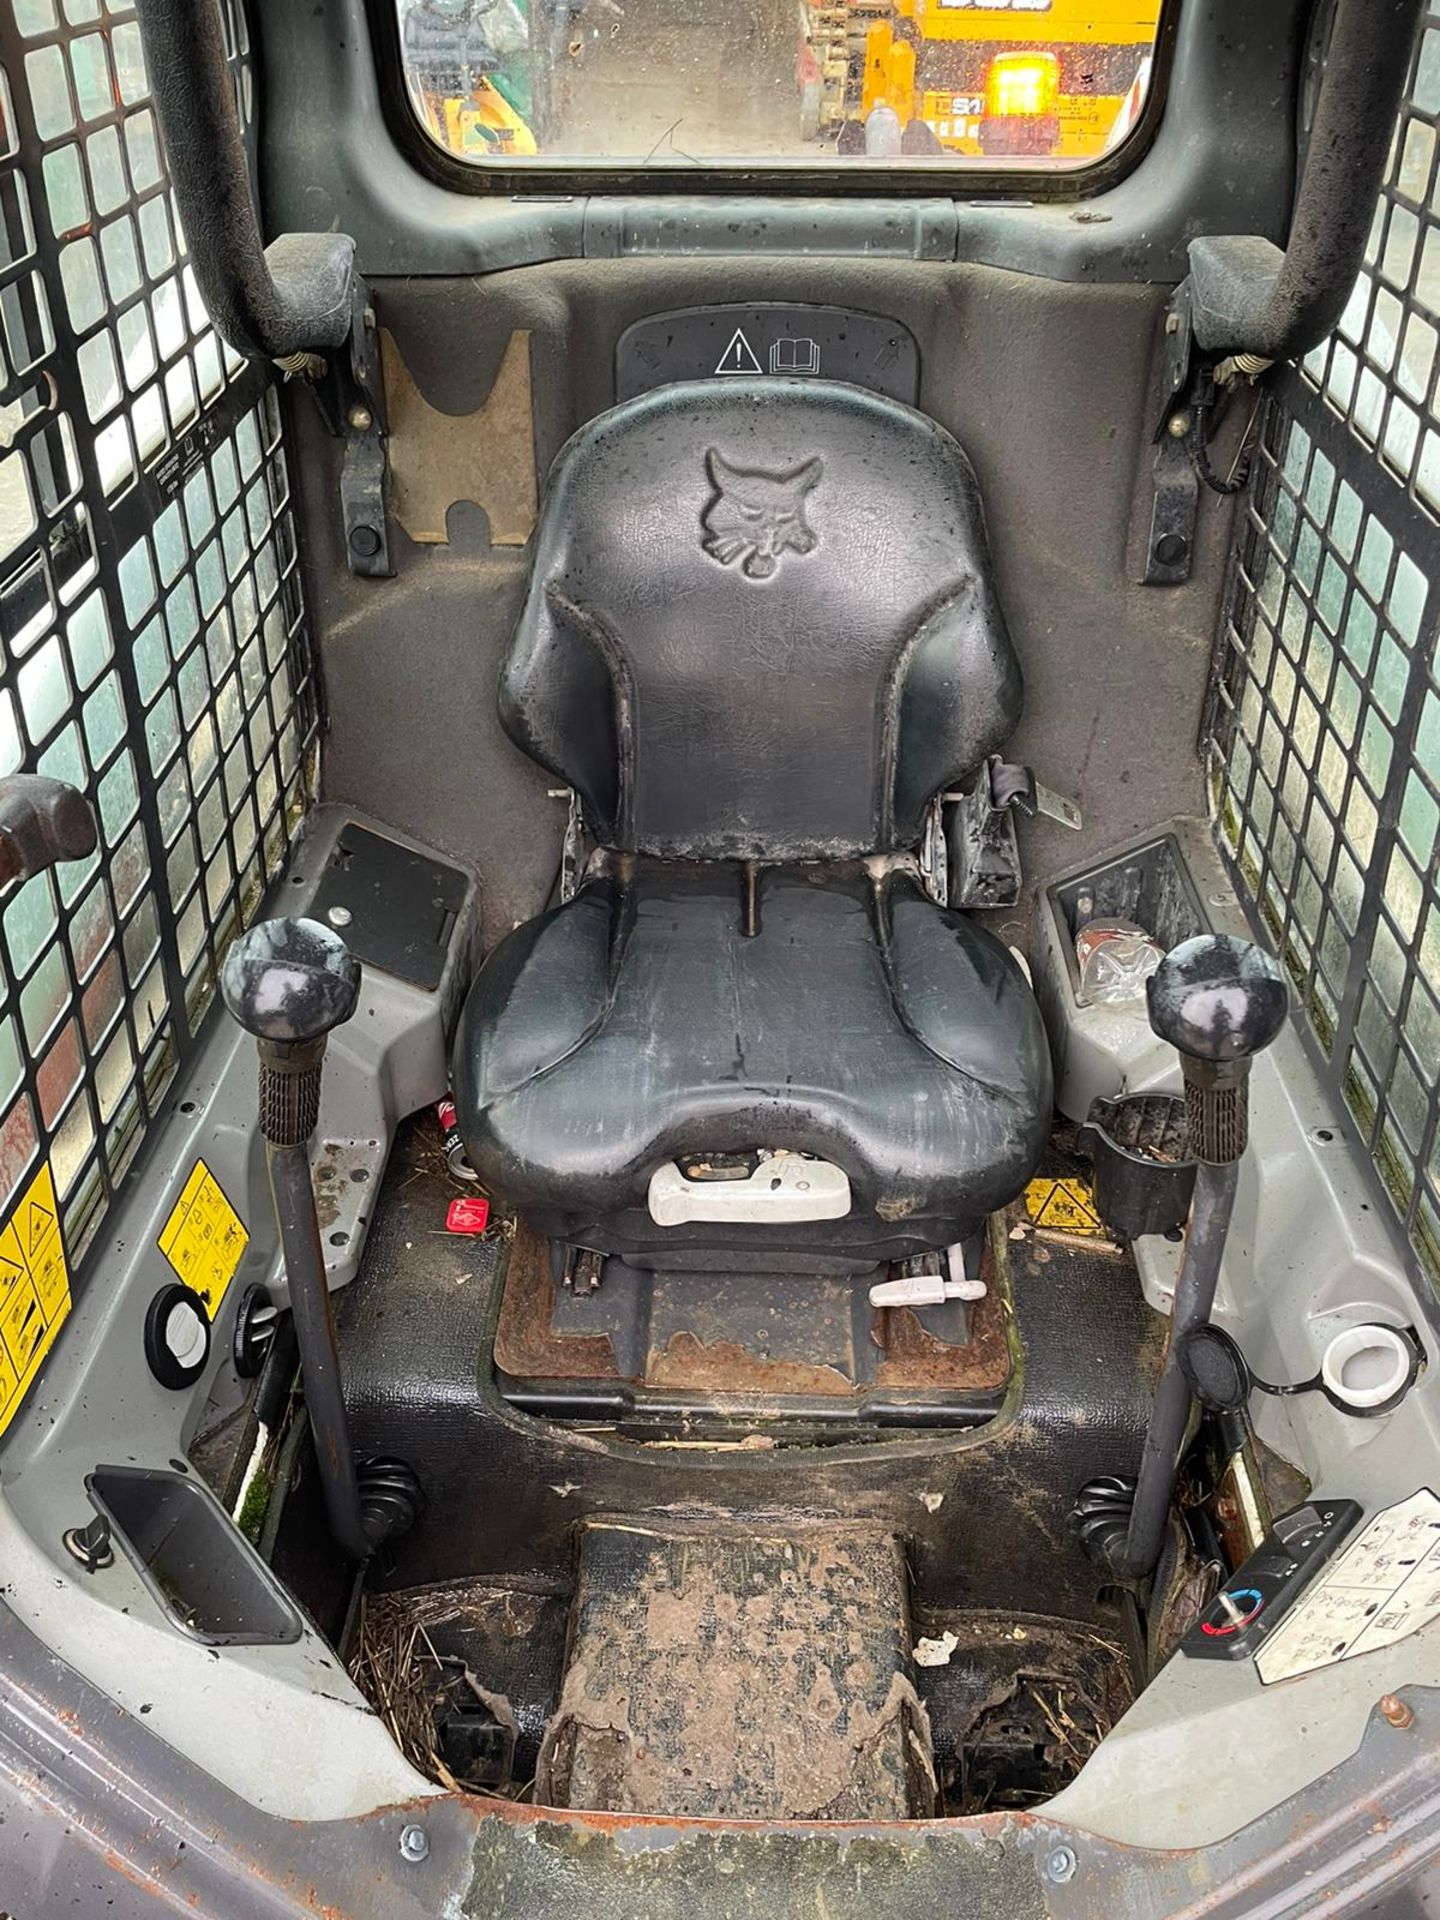 2014 BOBCAT S550 SKIDSTEER, RUNS, DRIVES AND LIFTS, IN USED BUT GOOD CONDITION *PLUS VAT* - Image 15 of 16